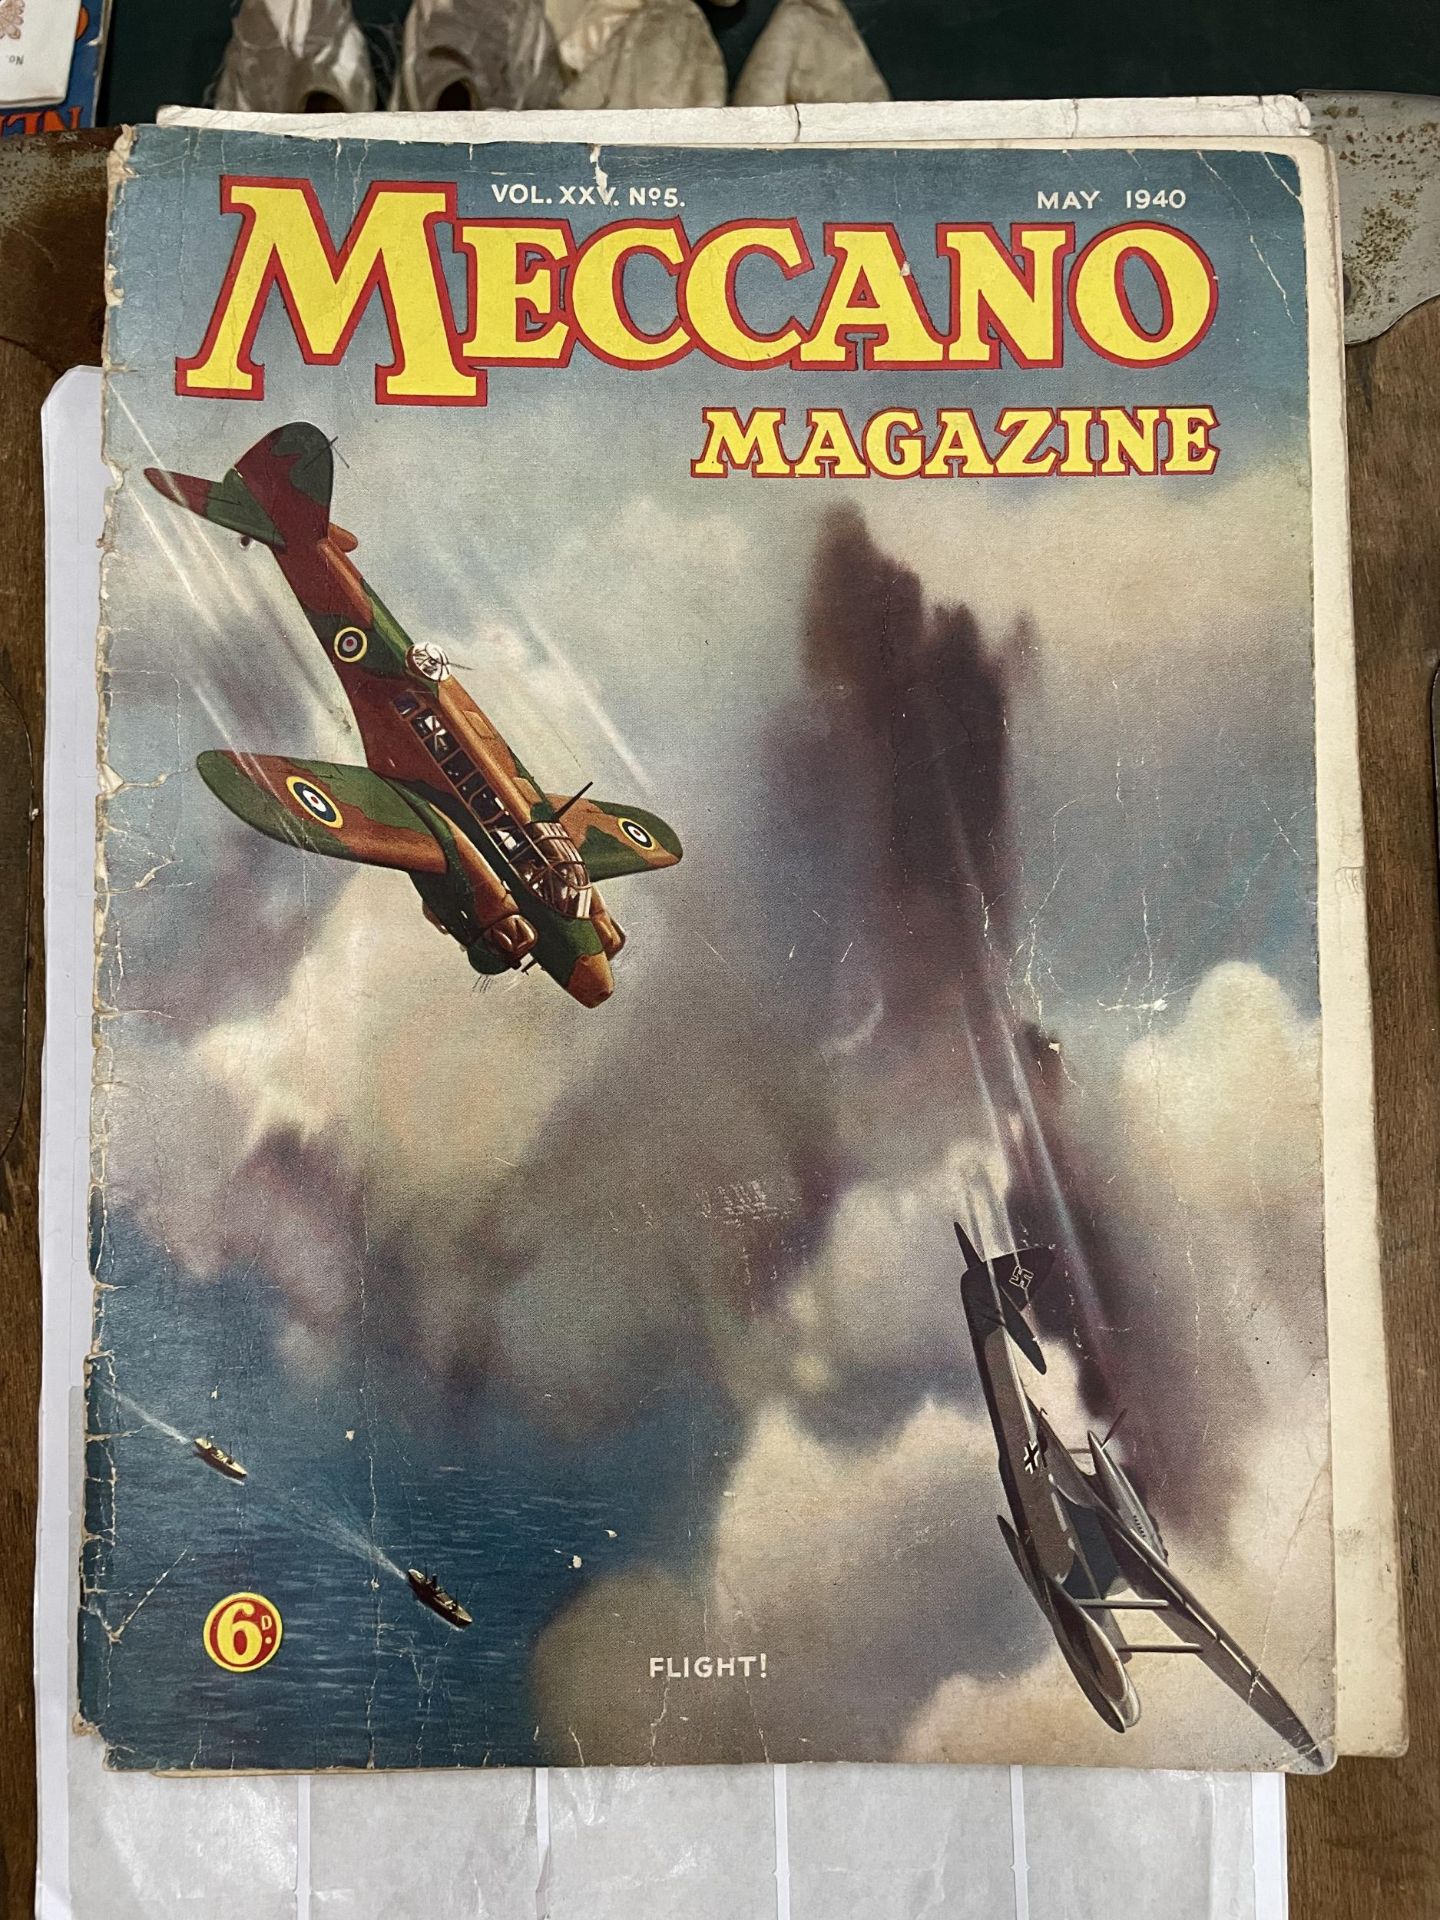 A VINTAGE MECCANO MAGAZINE FROM THE 1940'S - Image 2 of 3